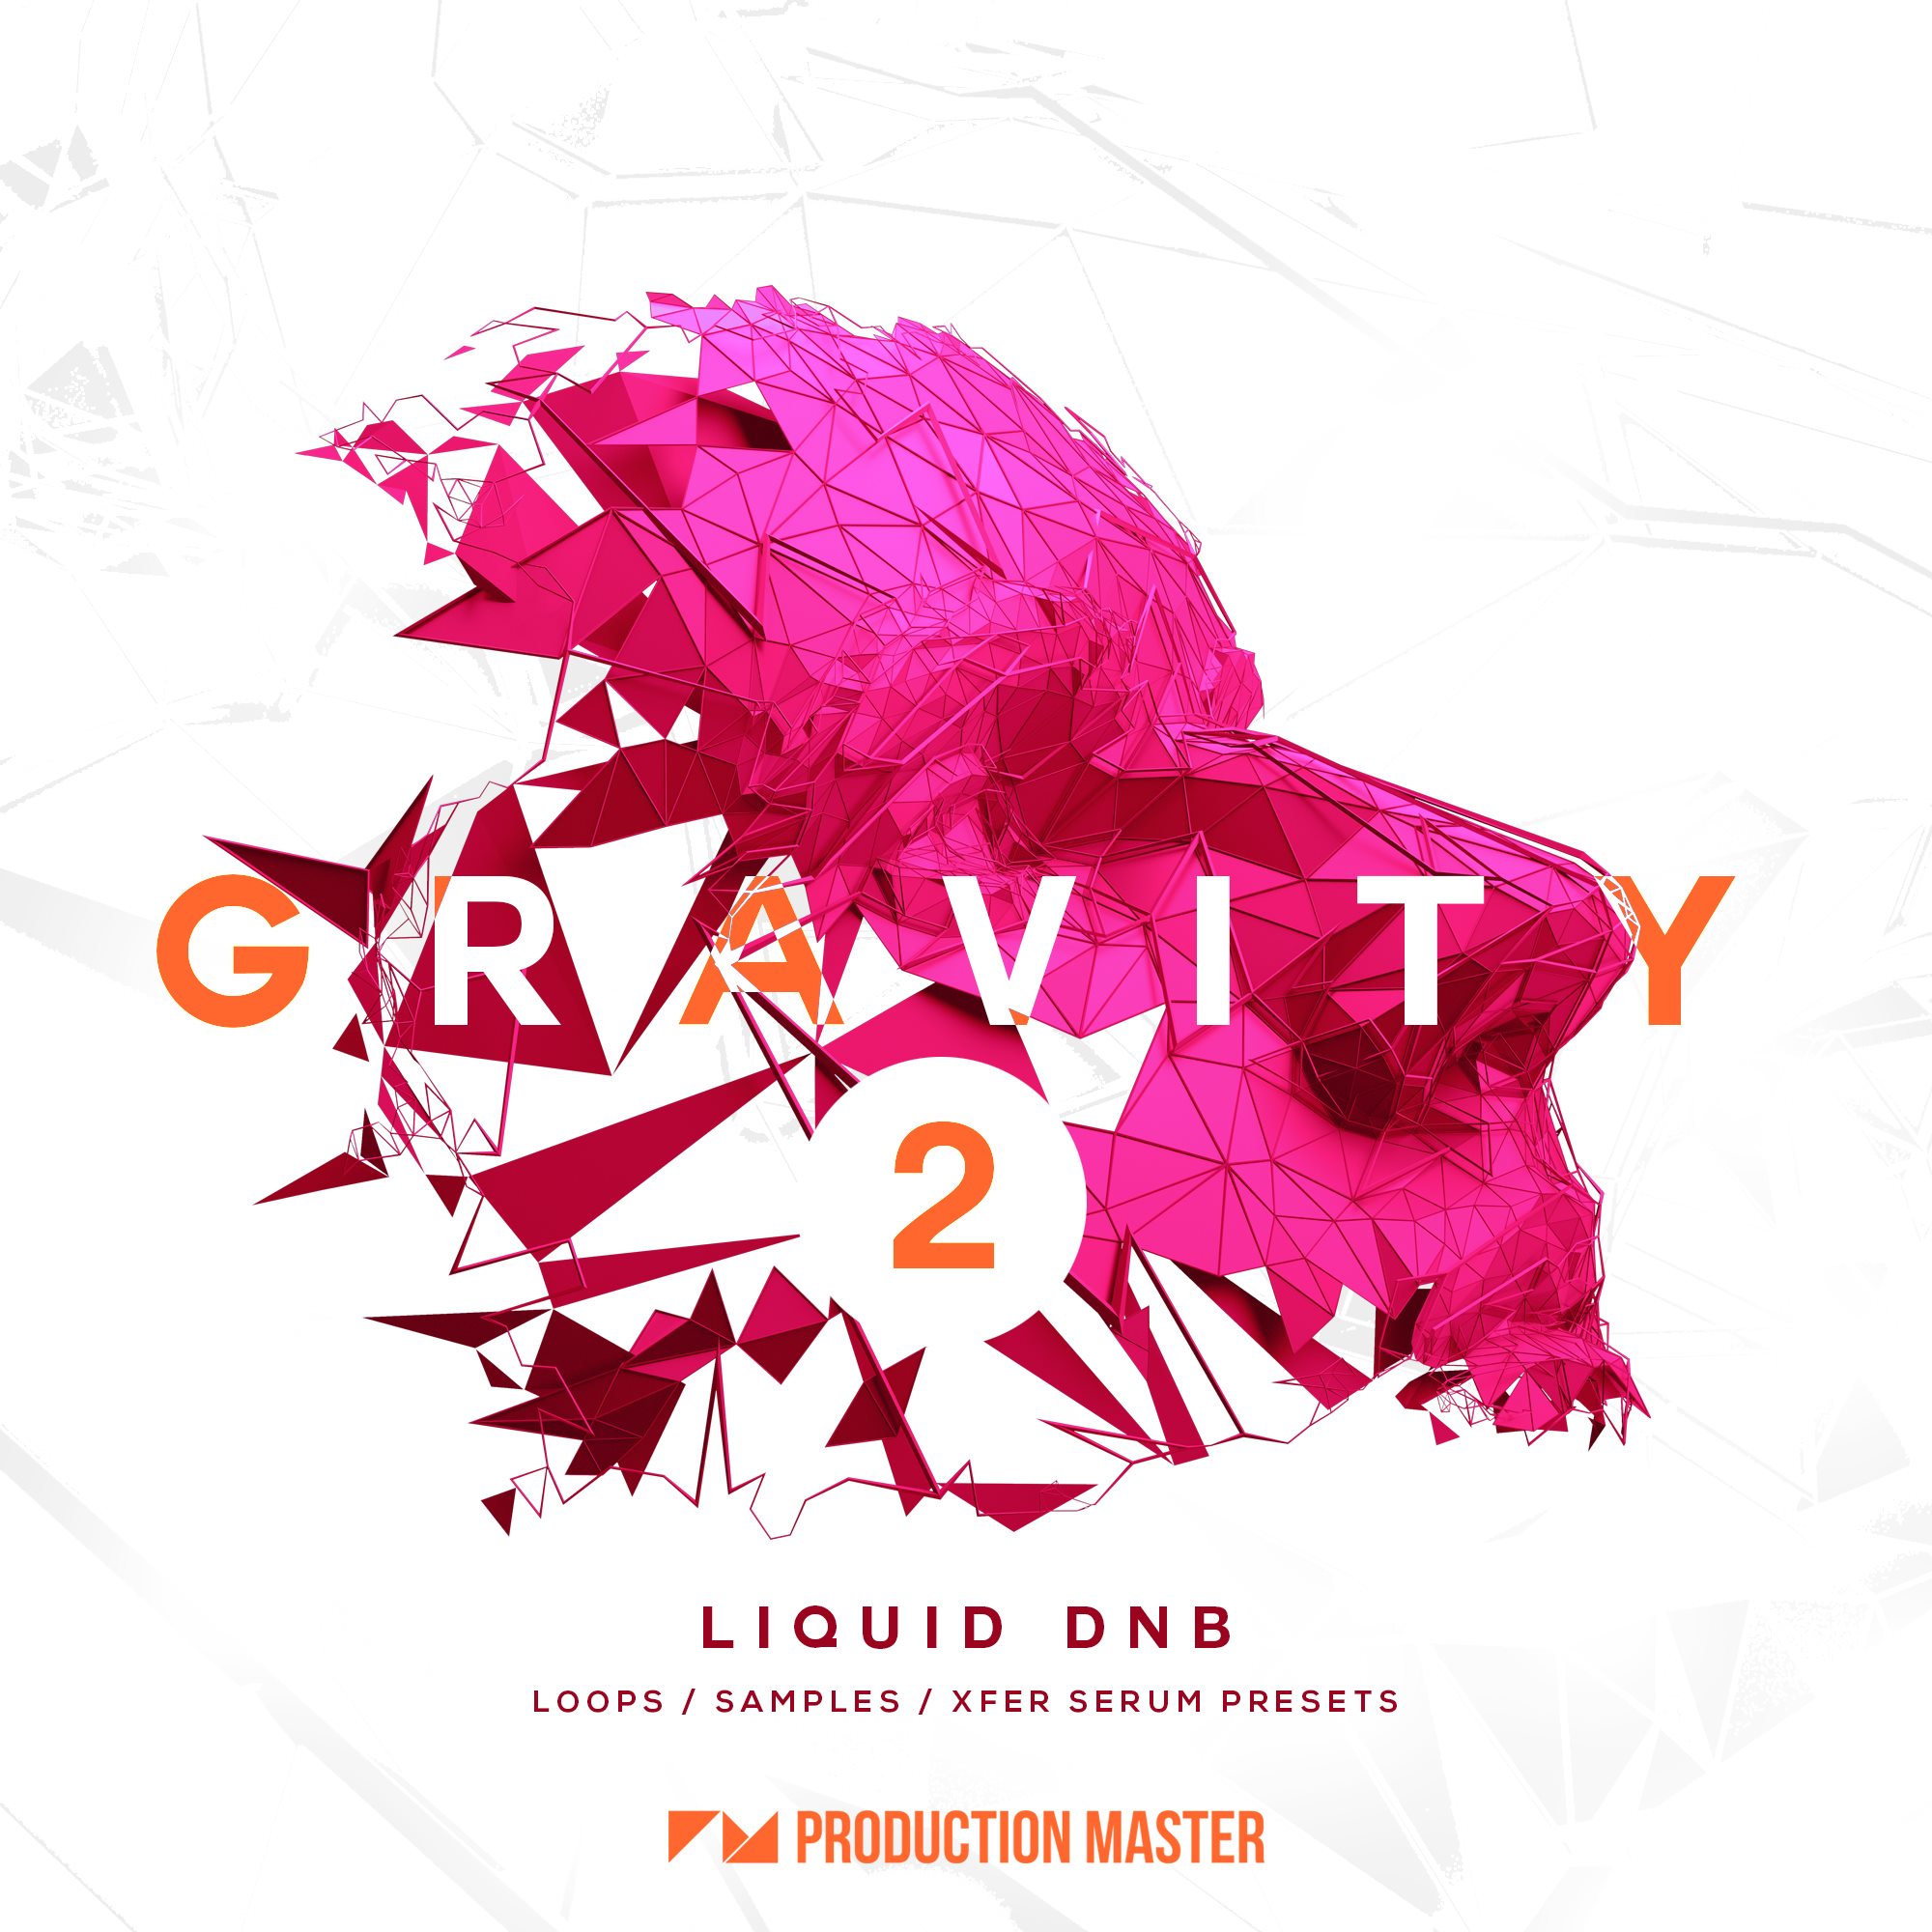 Product masters. Liquid DNB. DNB presets for Serum. Gravity Production. Production Masters Gravity Sample Pack.